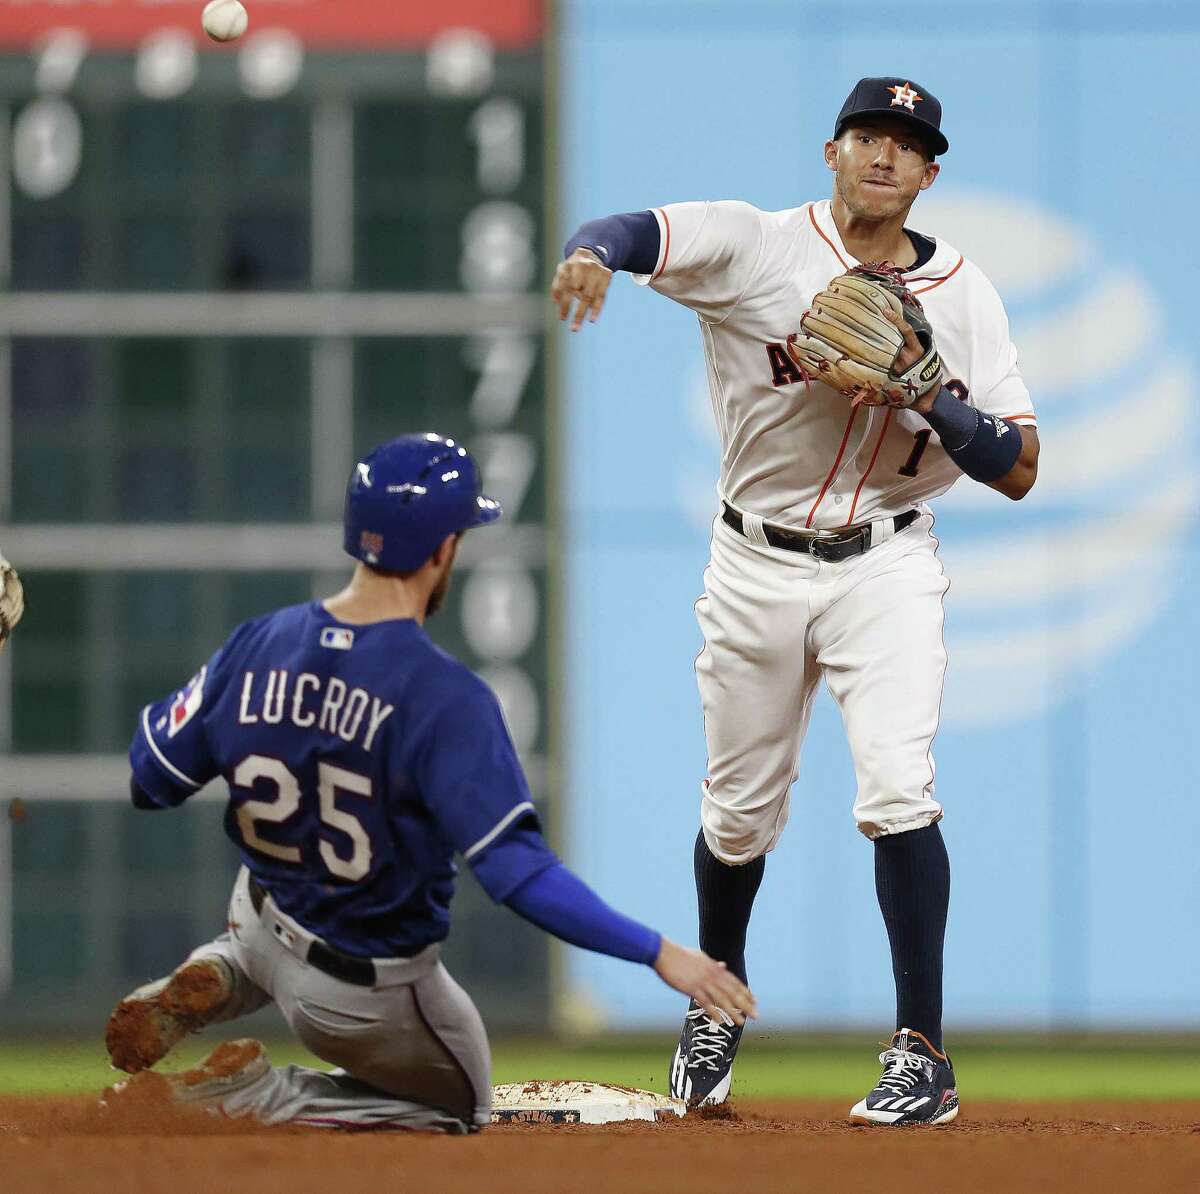 Shortstop Carlos Correa is looking for a breakout season as the young Astros are atop the AL West projections along with Texas as each team vies for a World Series title in 2017.